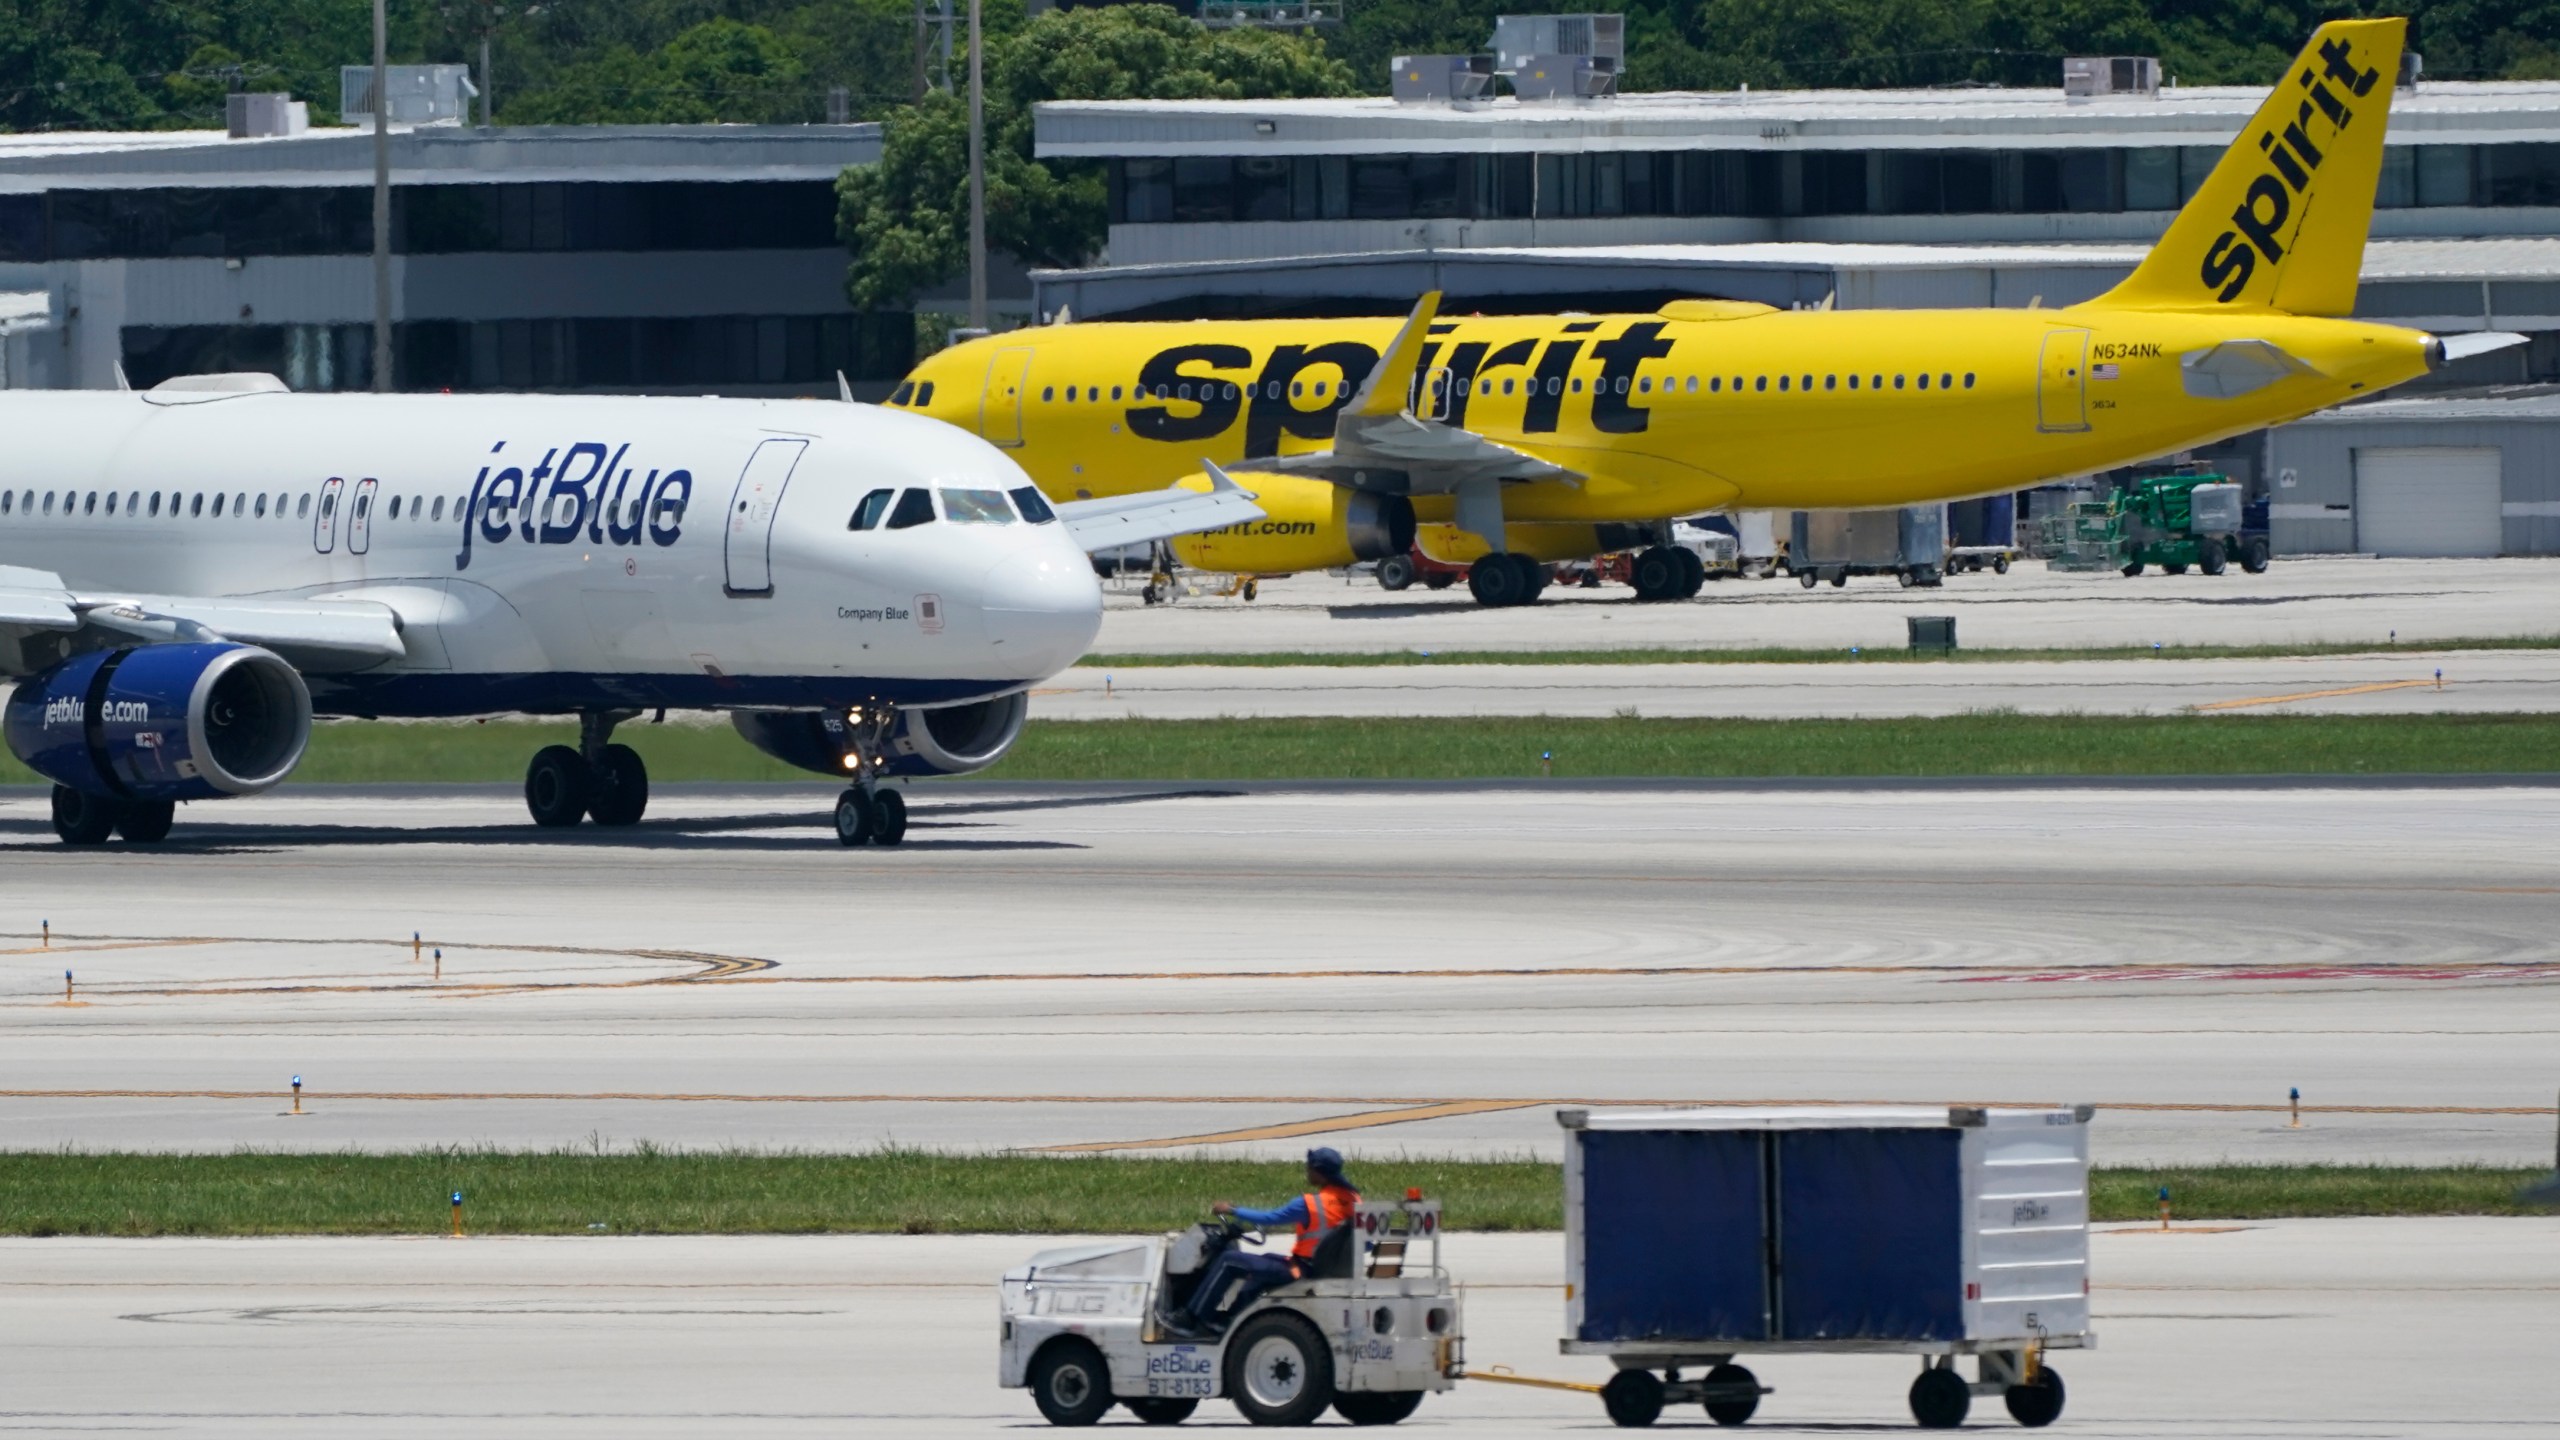 FILE - A JetBlue Airways Airbus A320, left, passes a Spirit Airlines Airbus A320 as it taxis on the runway, July 7, 2022, at the Fort Lauderdale-Hollywood International Airport in Fort Lauderdale, Fla. JetBlue and Spirit Airlines are ending their proposed $3.8 billion combination after a court ruling blocked their merger. JetBlue said Monday, March 4, 2024 that even though both companies still believe in the benefits of a combination, they felt they were unlikely to meet the required closing conditions before the July 24 deadline and mutually agreed that terminating the deal was the best decision for both. (AP Photo/Wilfredo Lee, File)